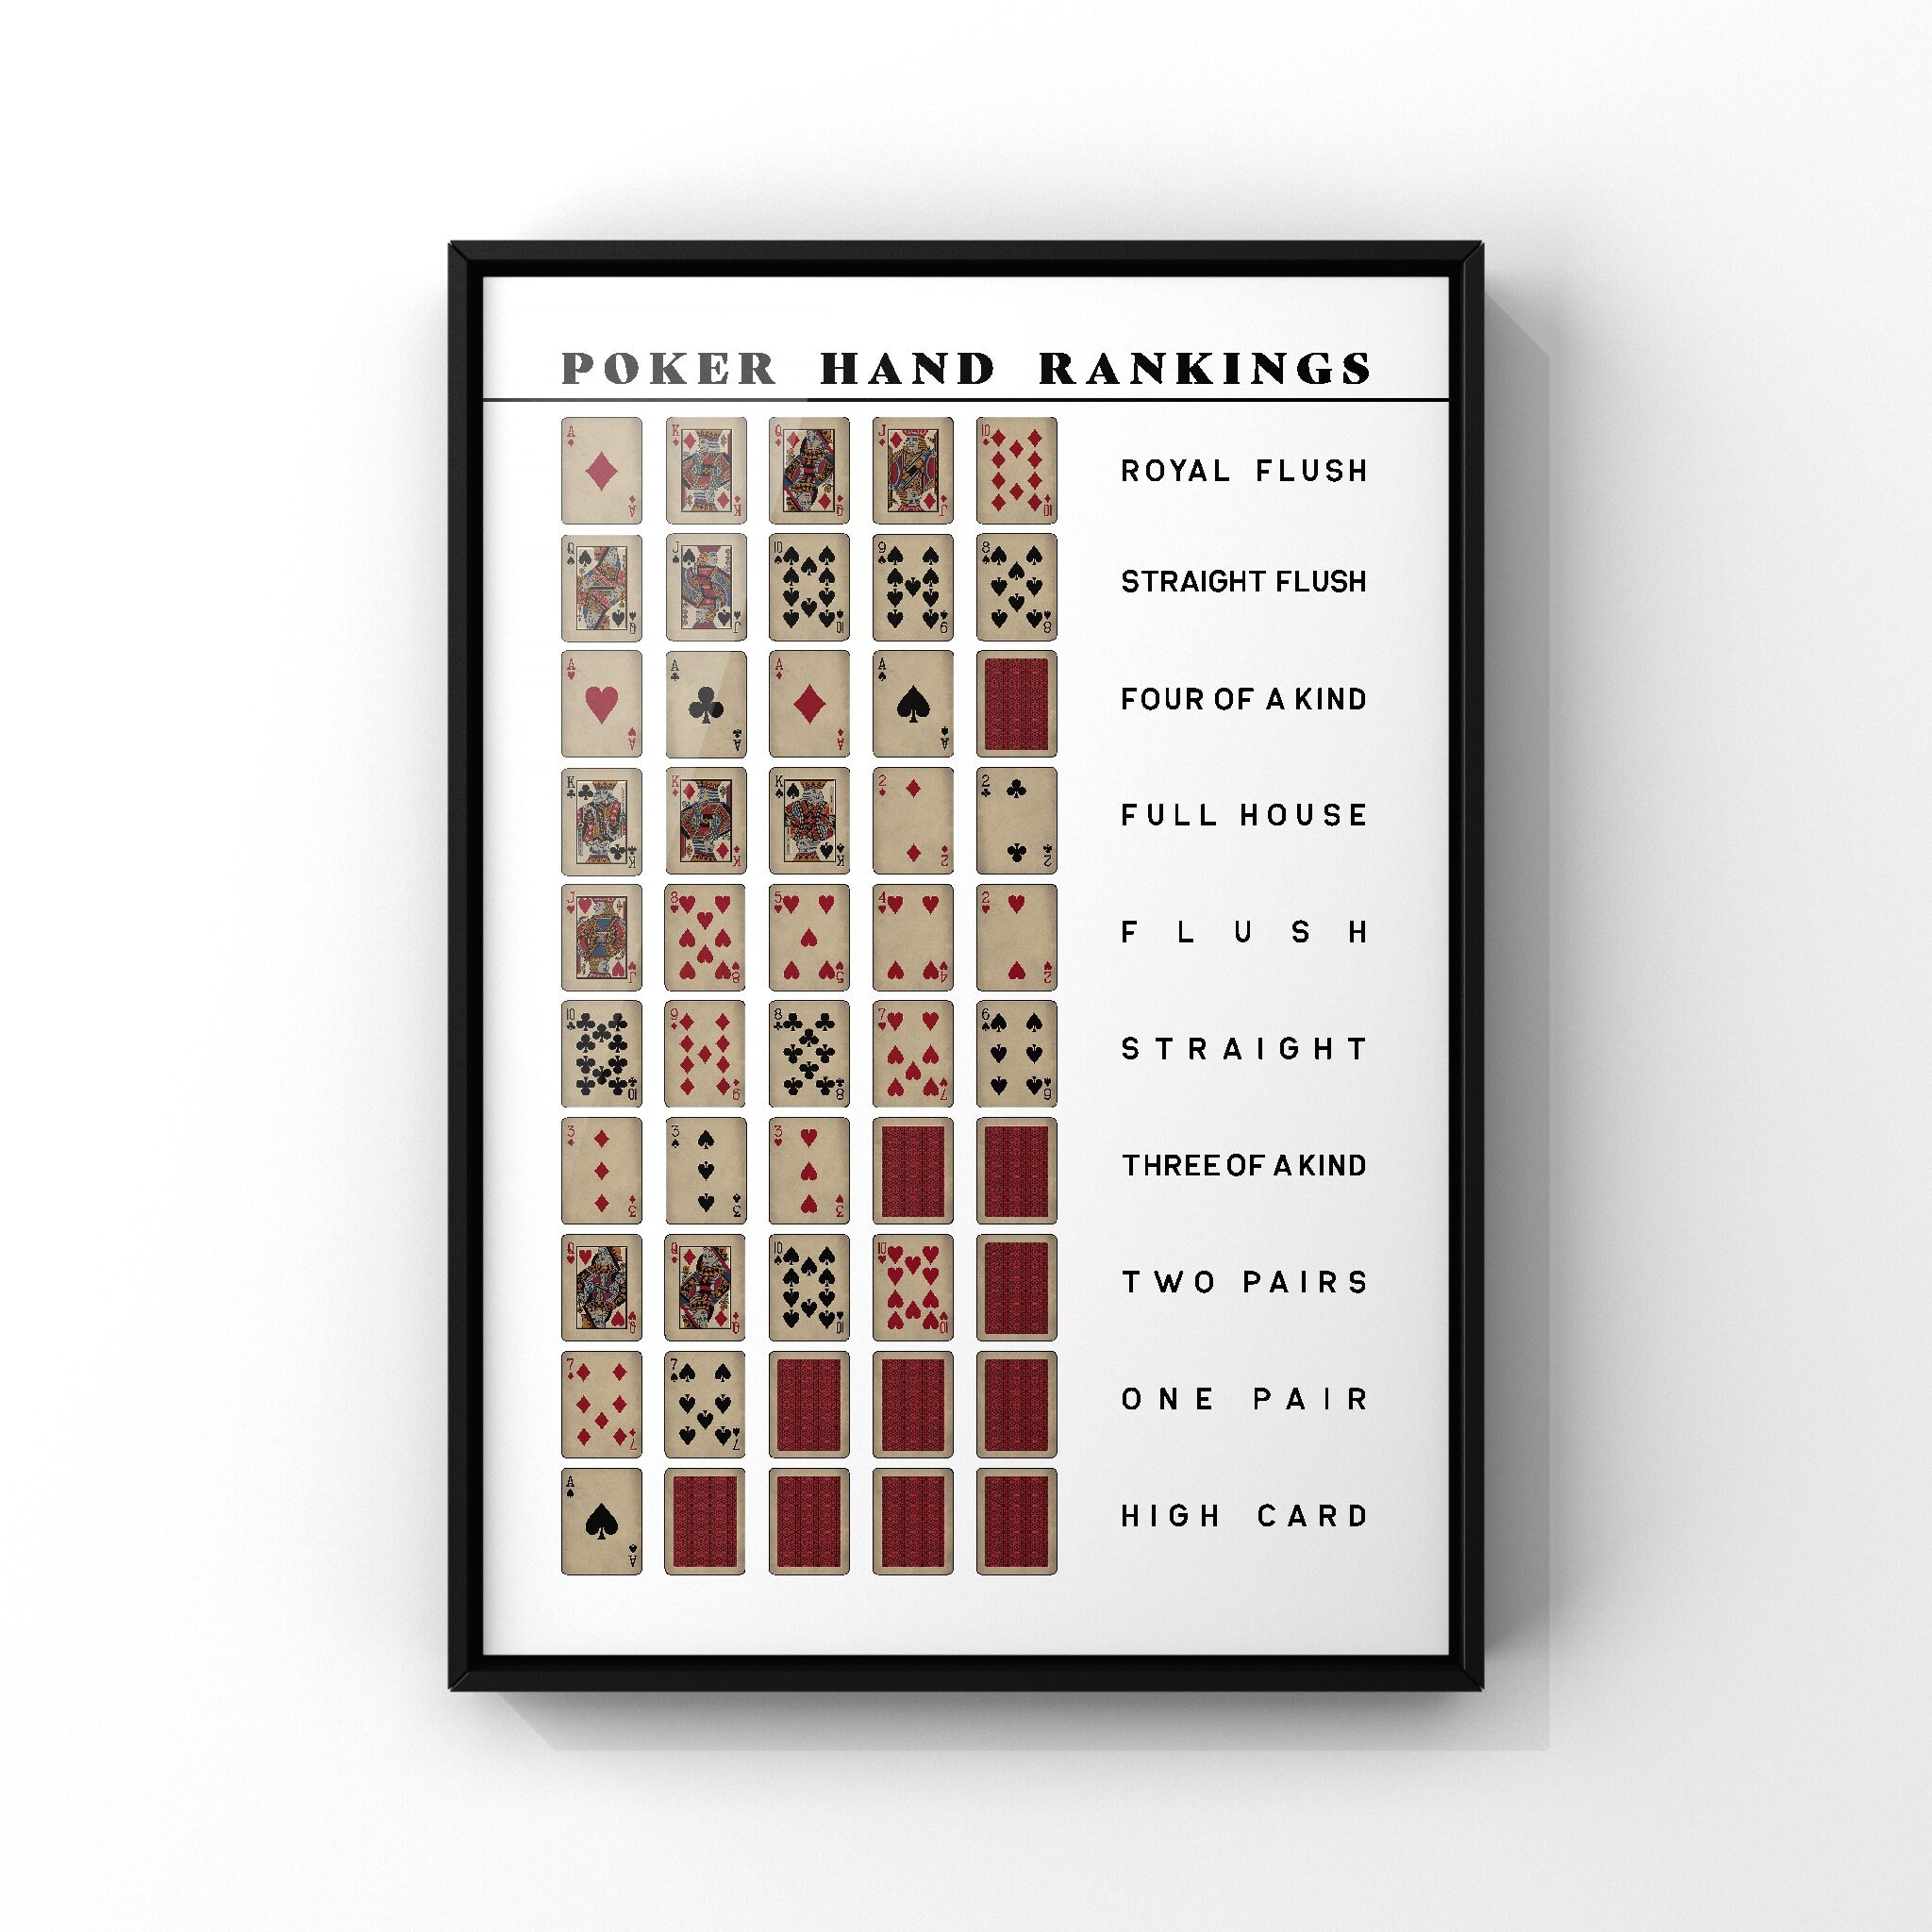 POKER AMERICAN AIRLINES PAIRE D'AS Poster Grand format A0 Large Print